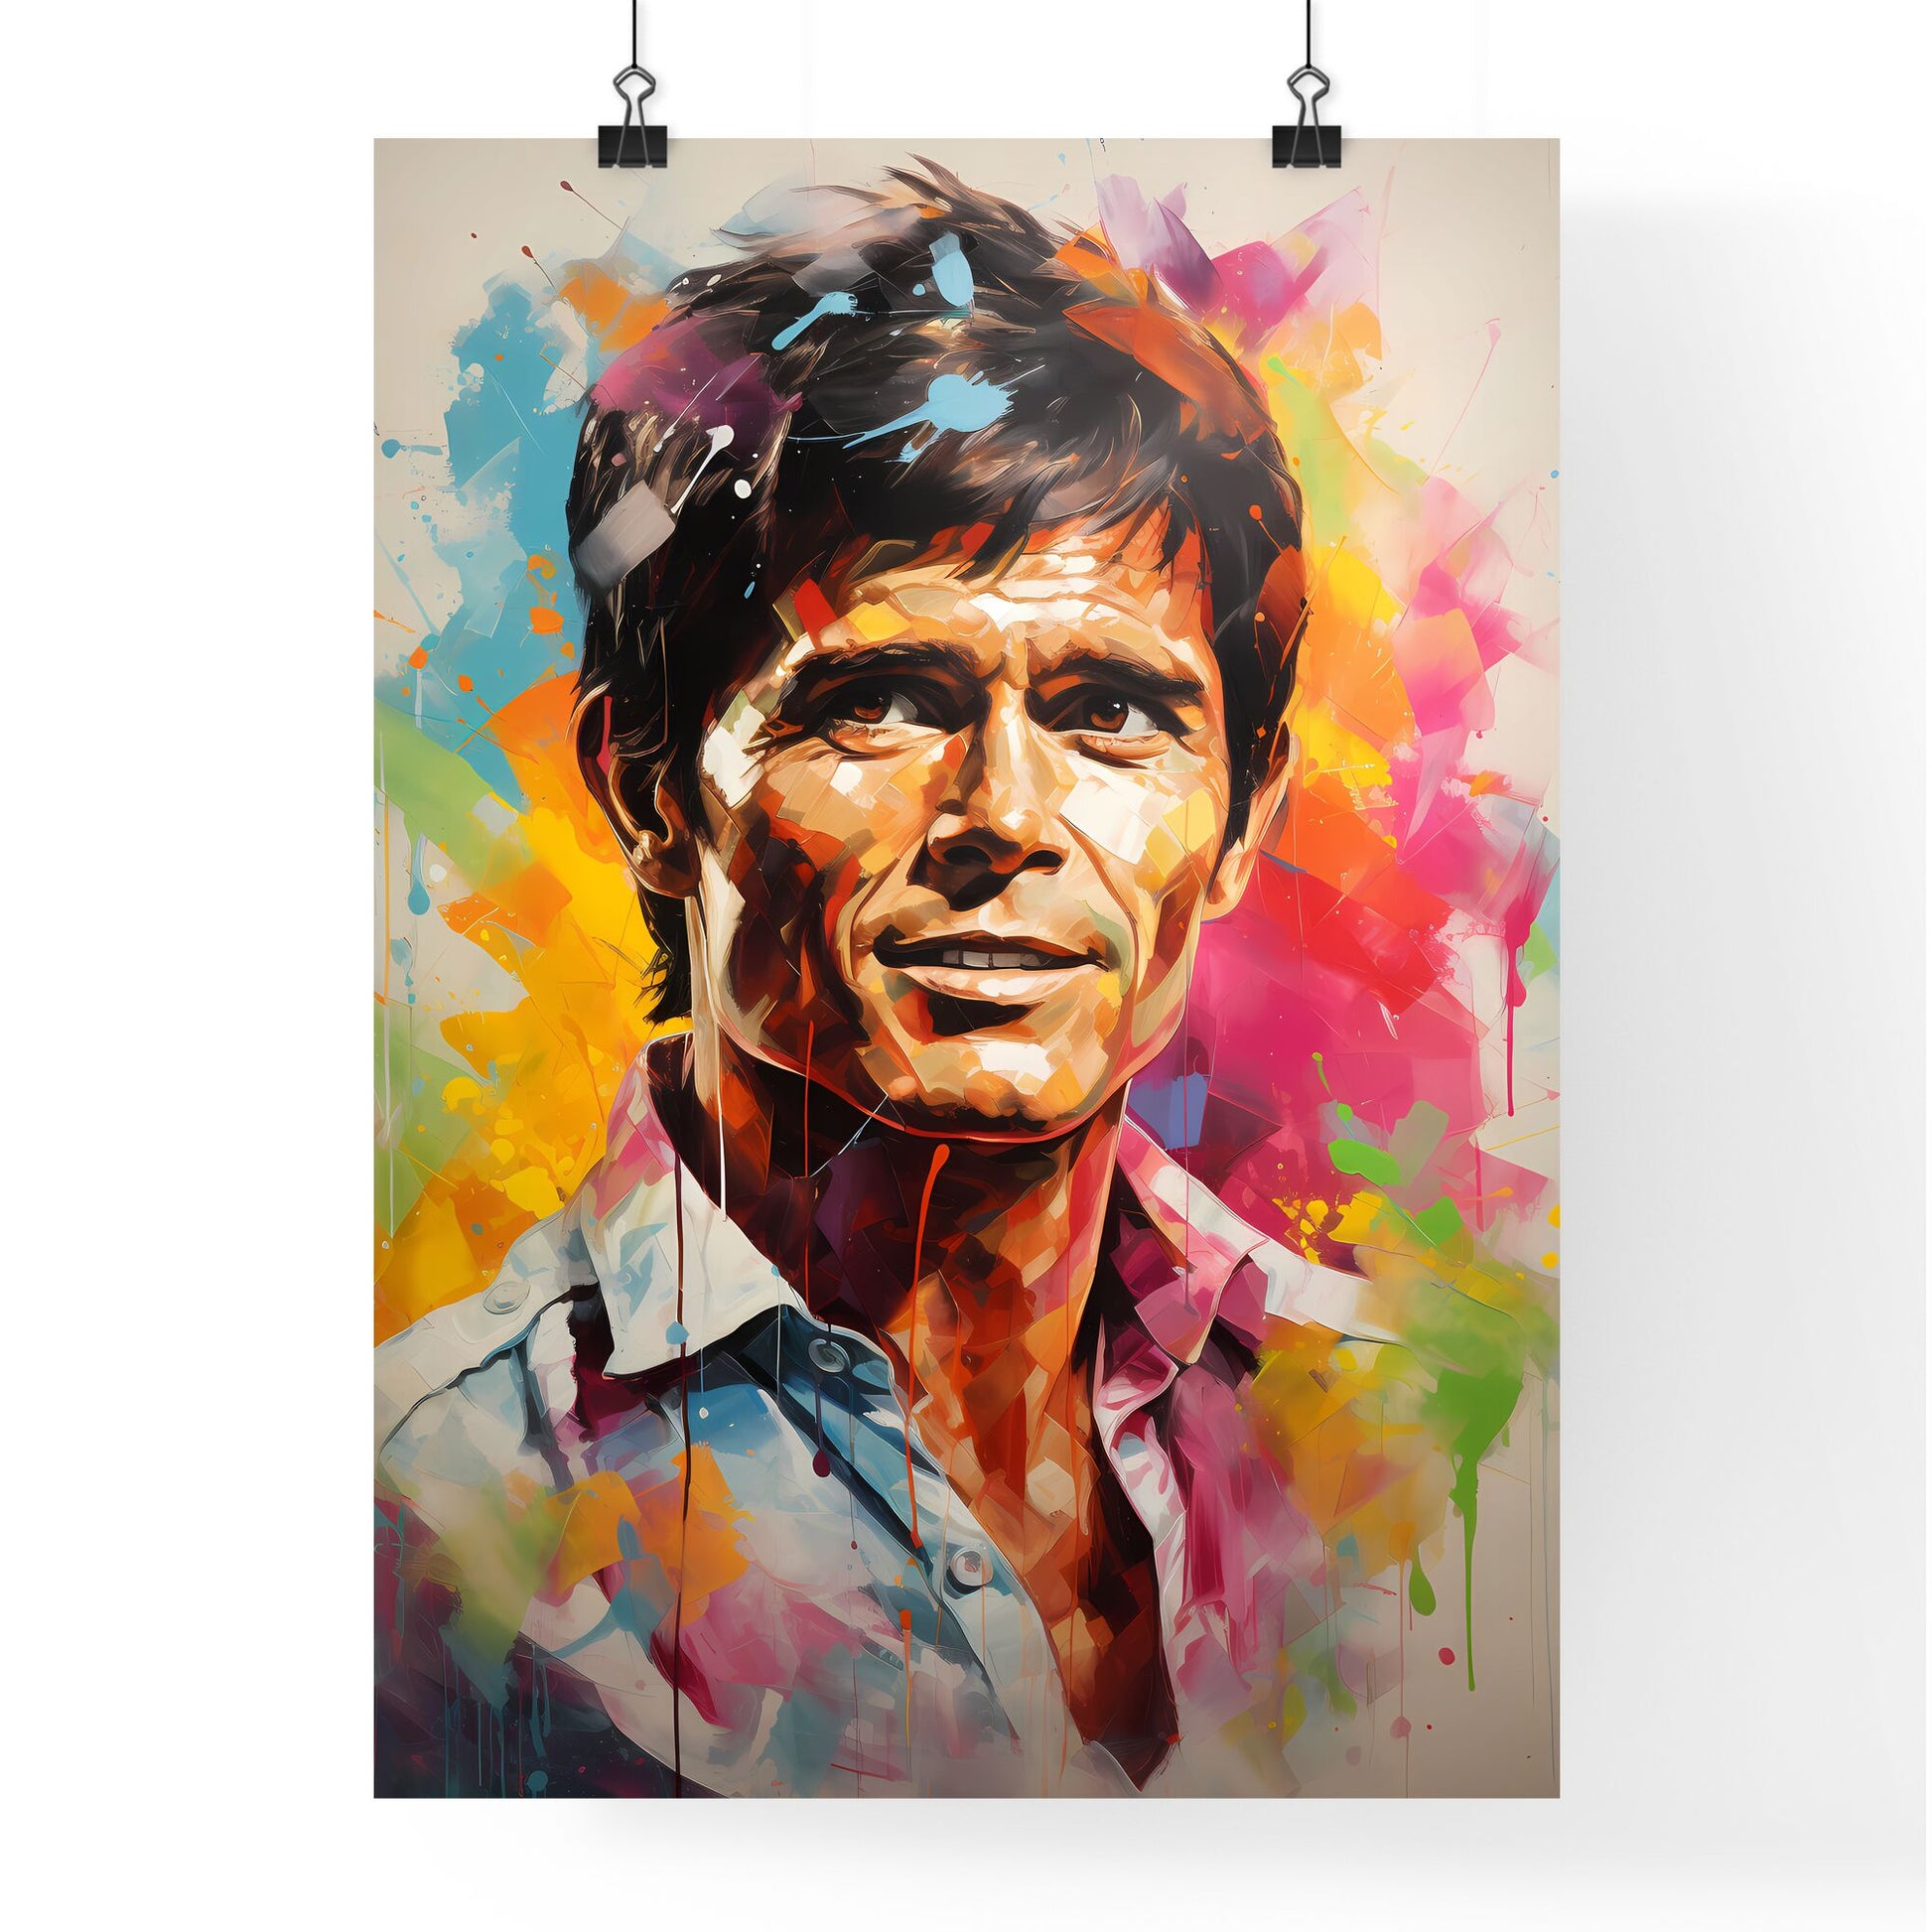 Cliff Richard - A Painting Of A Man Default Title